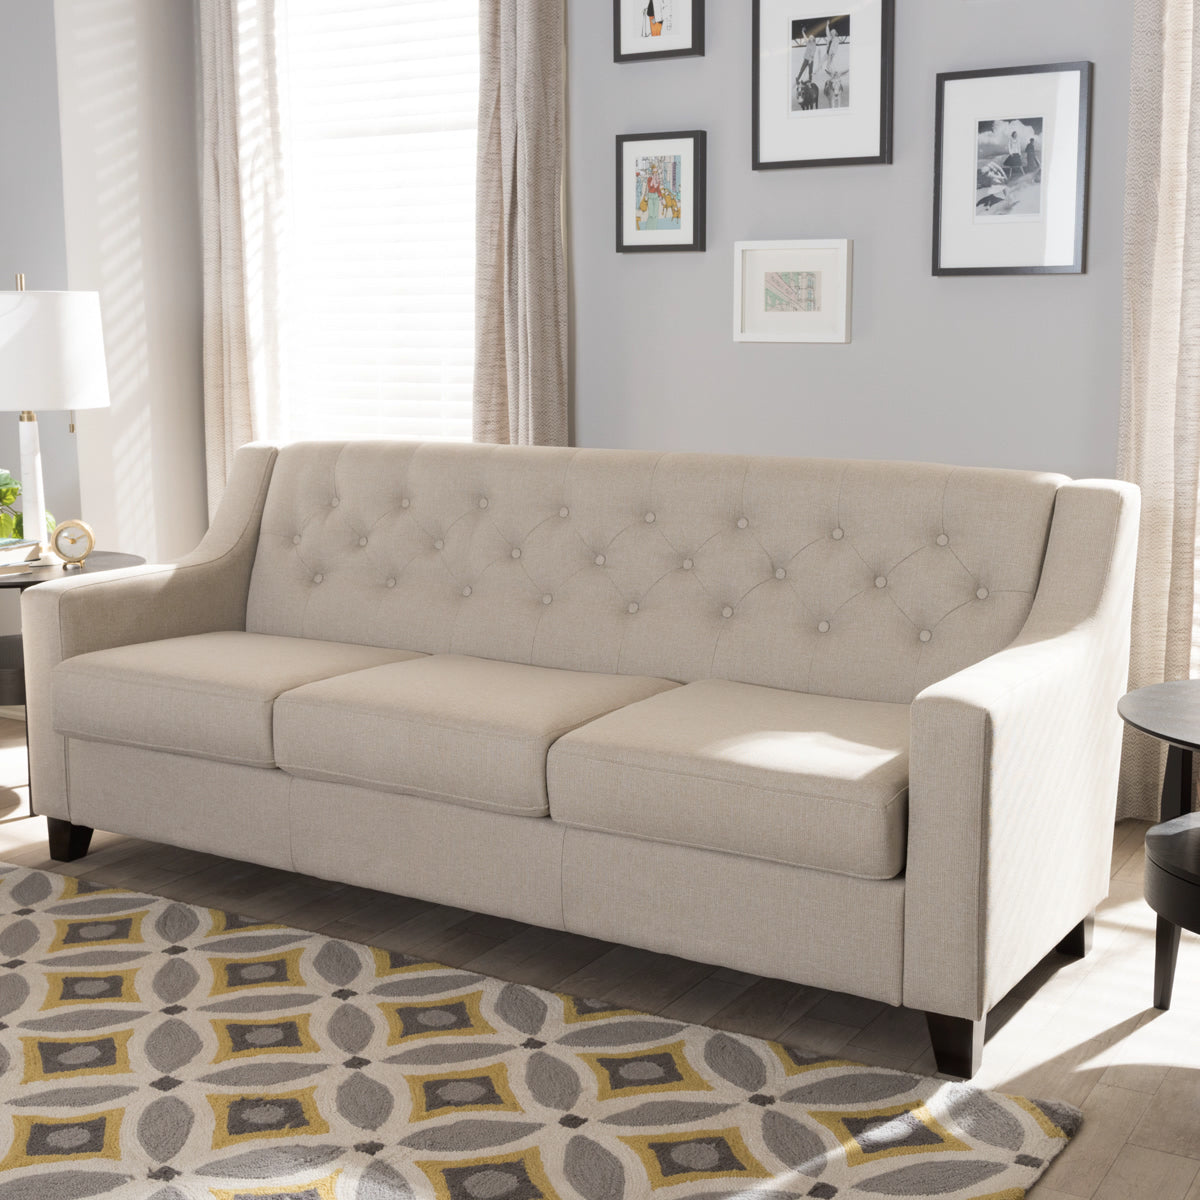 Baxton Studio Arcadia Modern and Contemporary Light Beige Fabric Upholstered Button-Tufted Living Room 3-Seater Sofa Baxton Studio-sofas-Minimal And Modern - 1